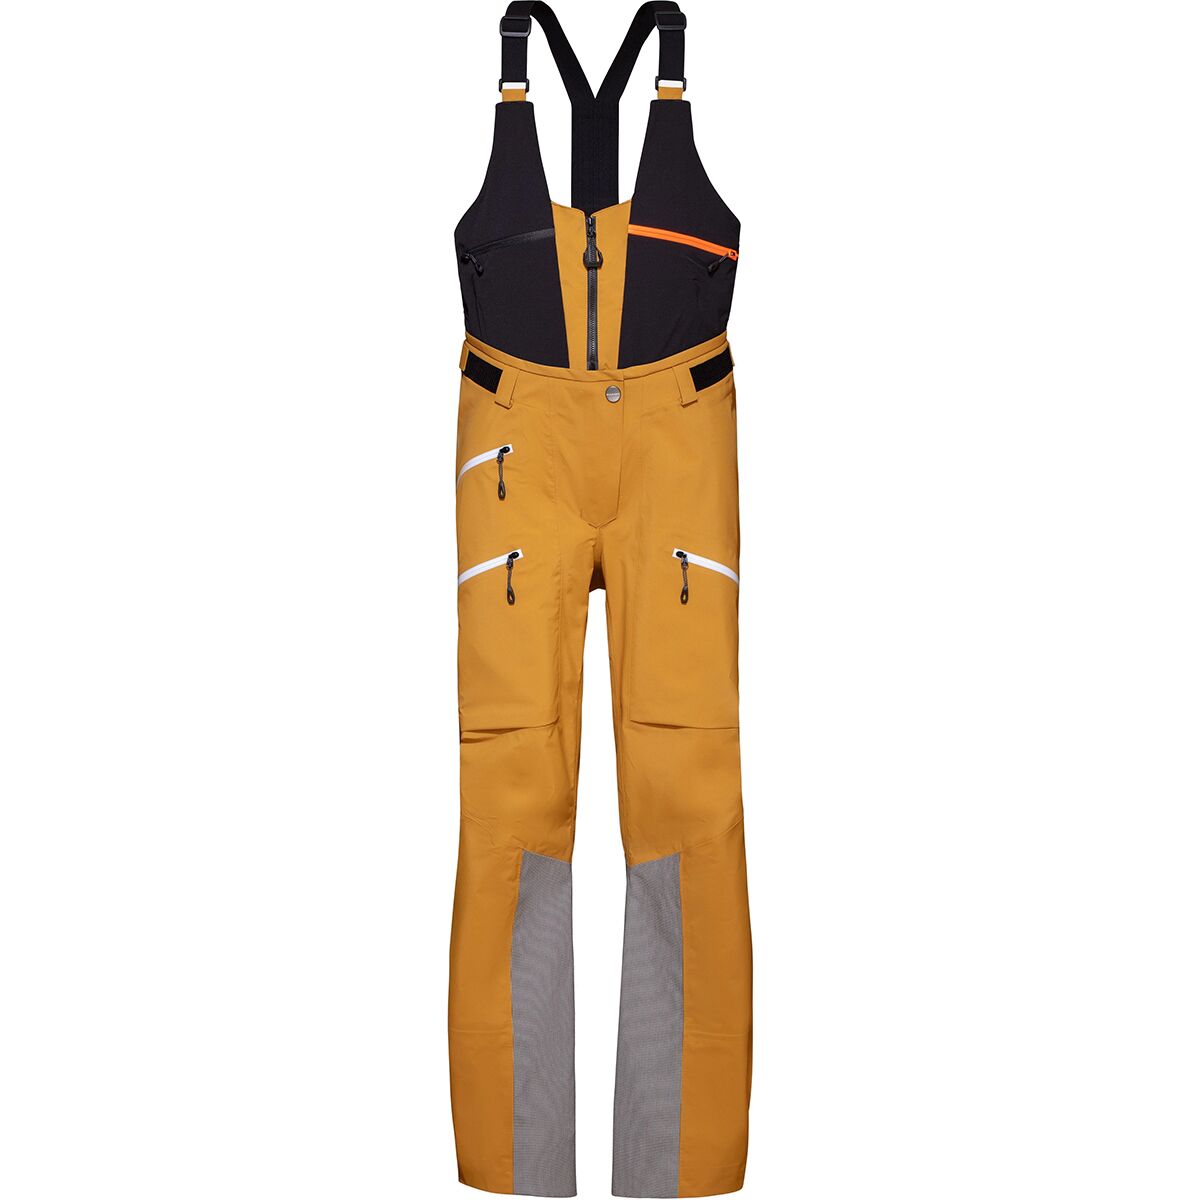 Mammut Taiss Pro SO Ski Pants  The BackCountry in Truckee, CA - The  BackCountry